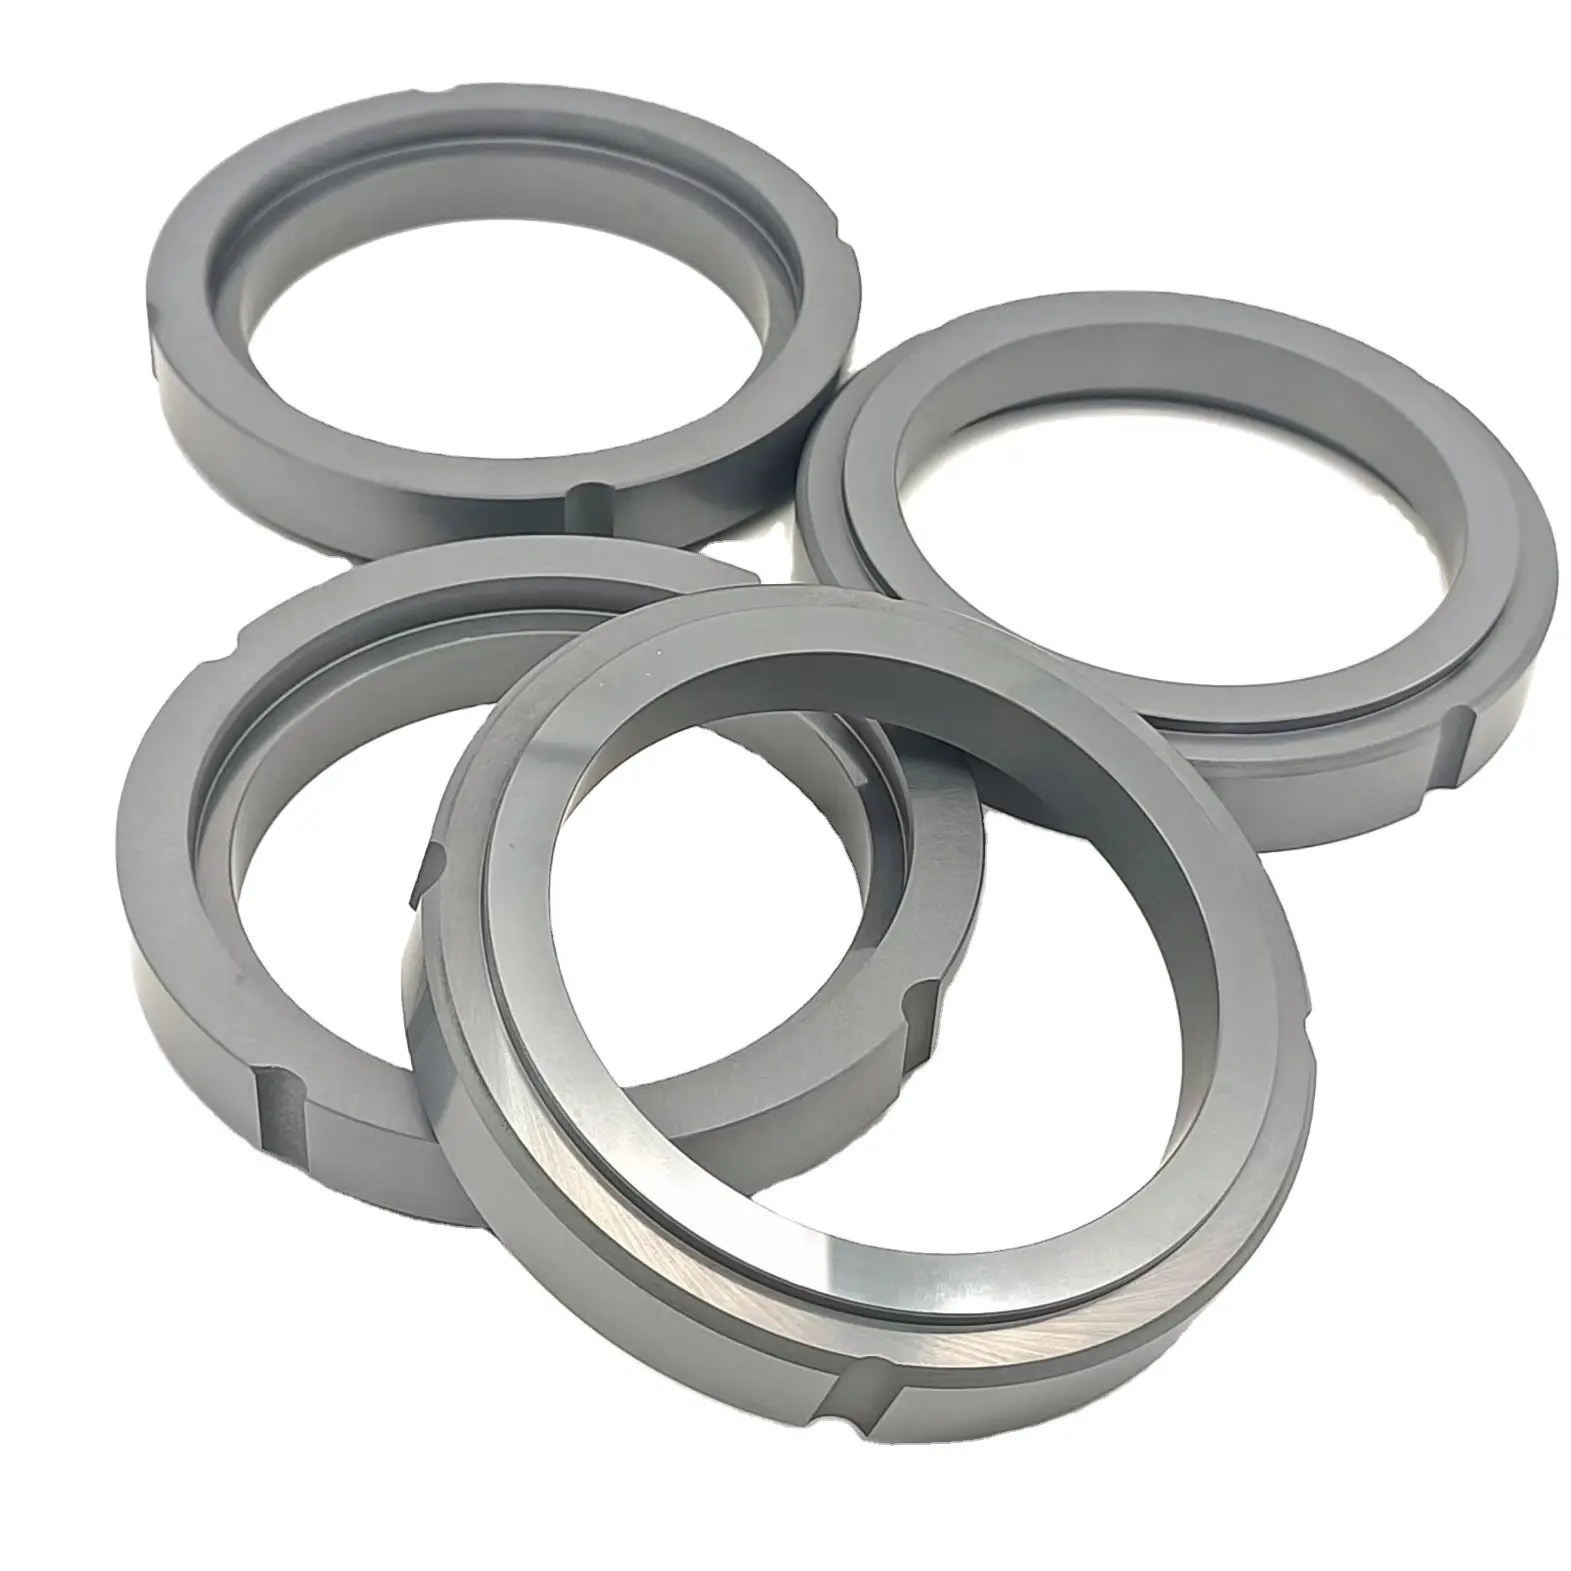 Atmospheric sintering SiC/SSIC mechanical seal stationary face ring